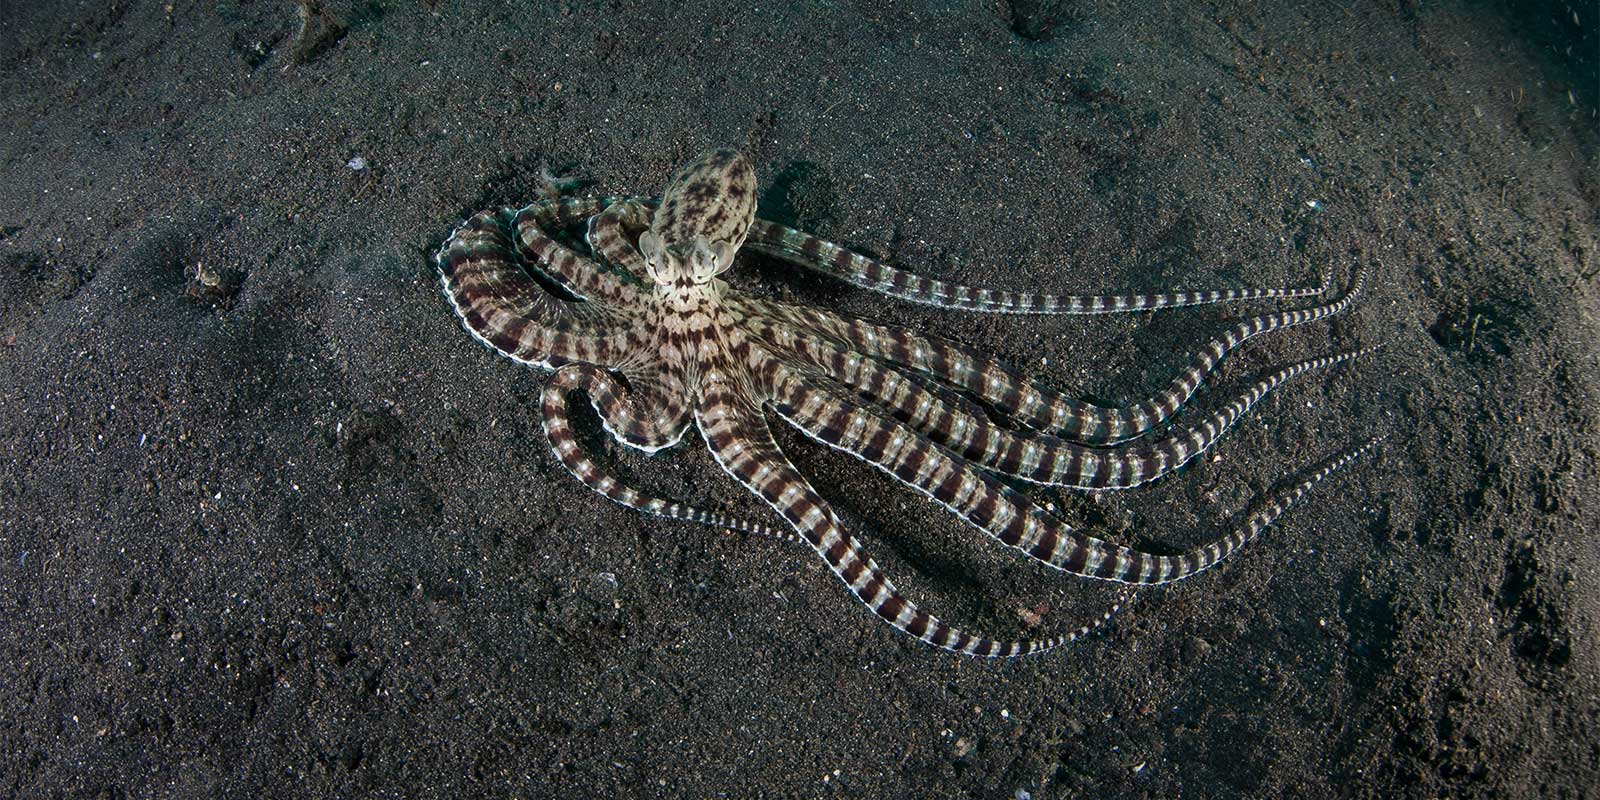 Mimic octopus in Lembeh Strait, Indonesia